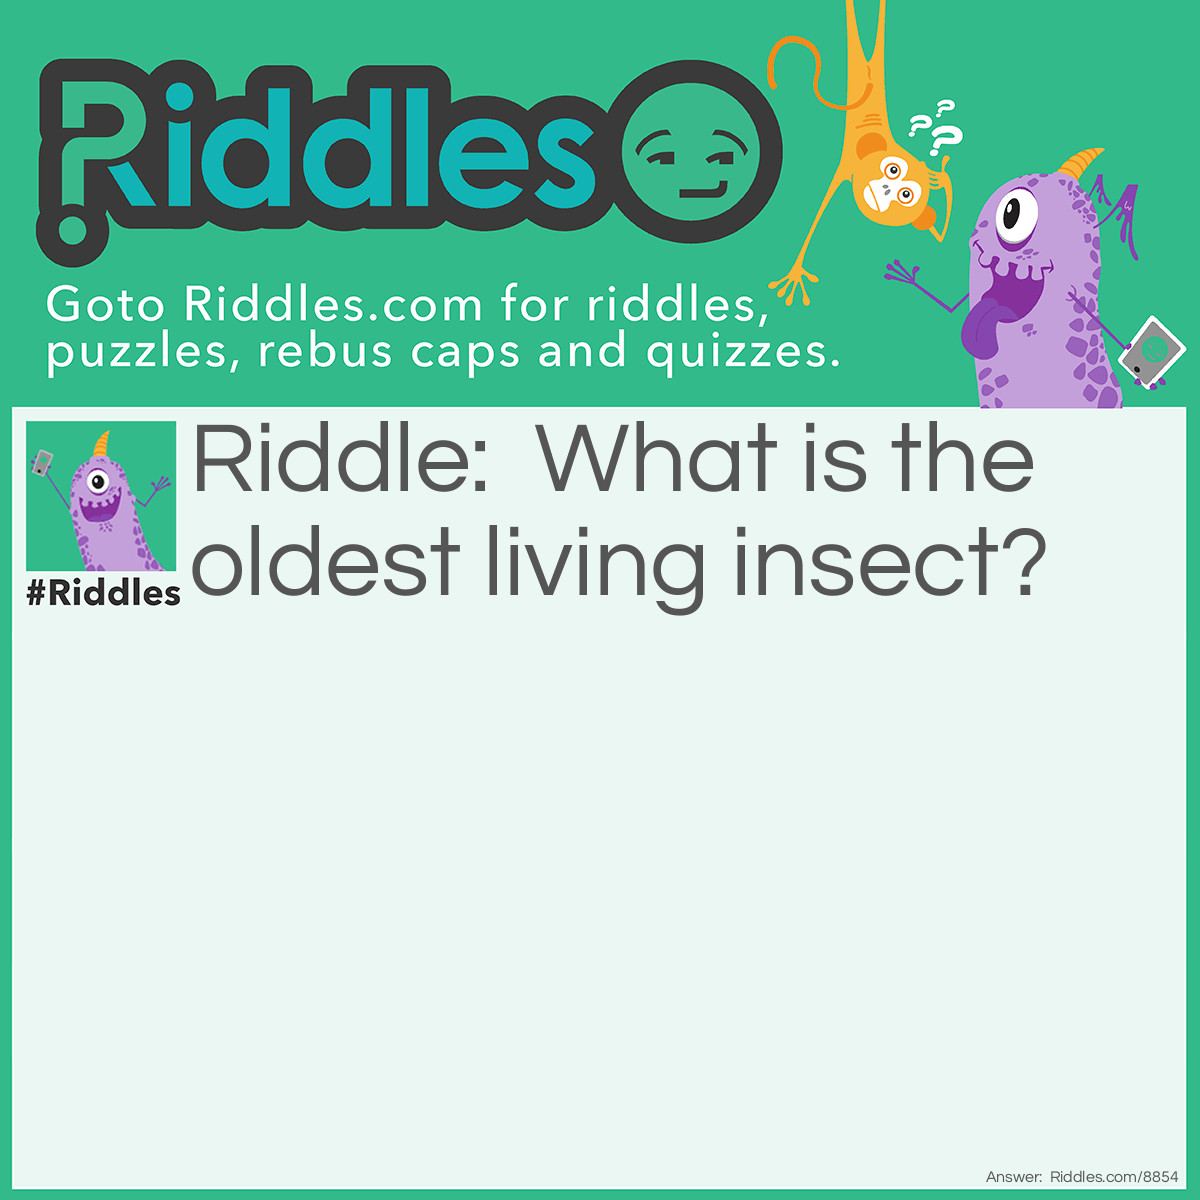 Riddle: What is the oldest living insect? Answer: VW Beetle, since 1938.